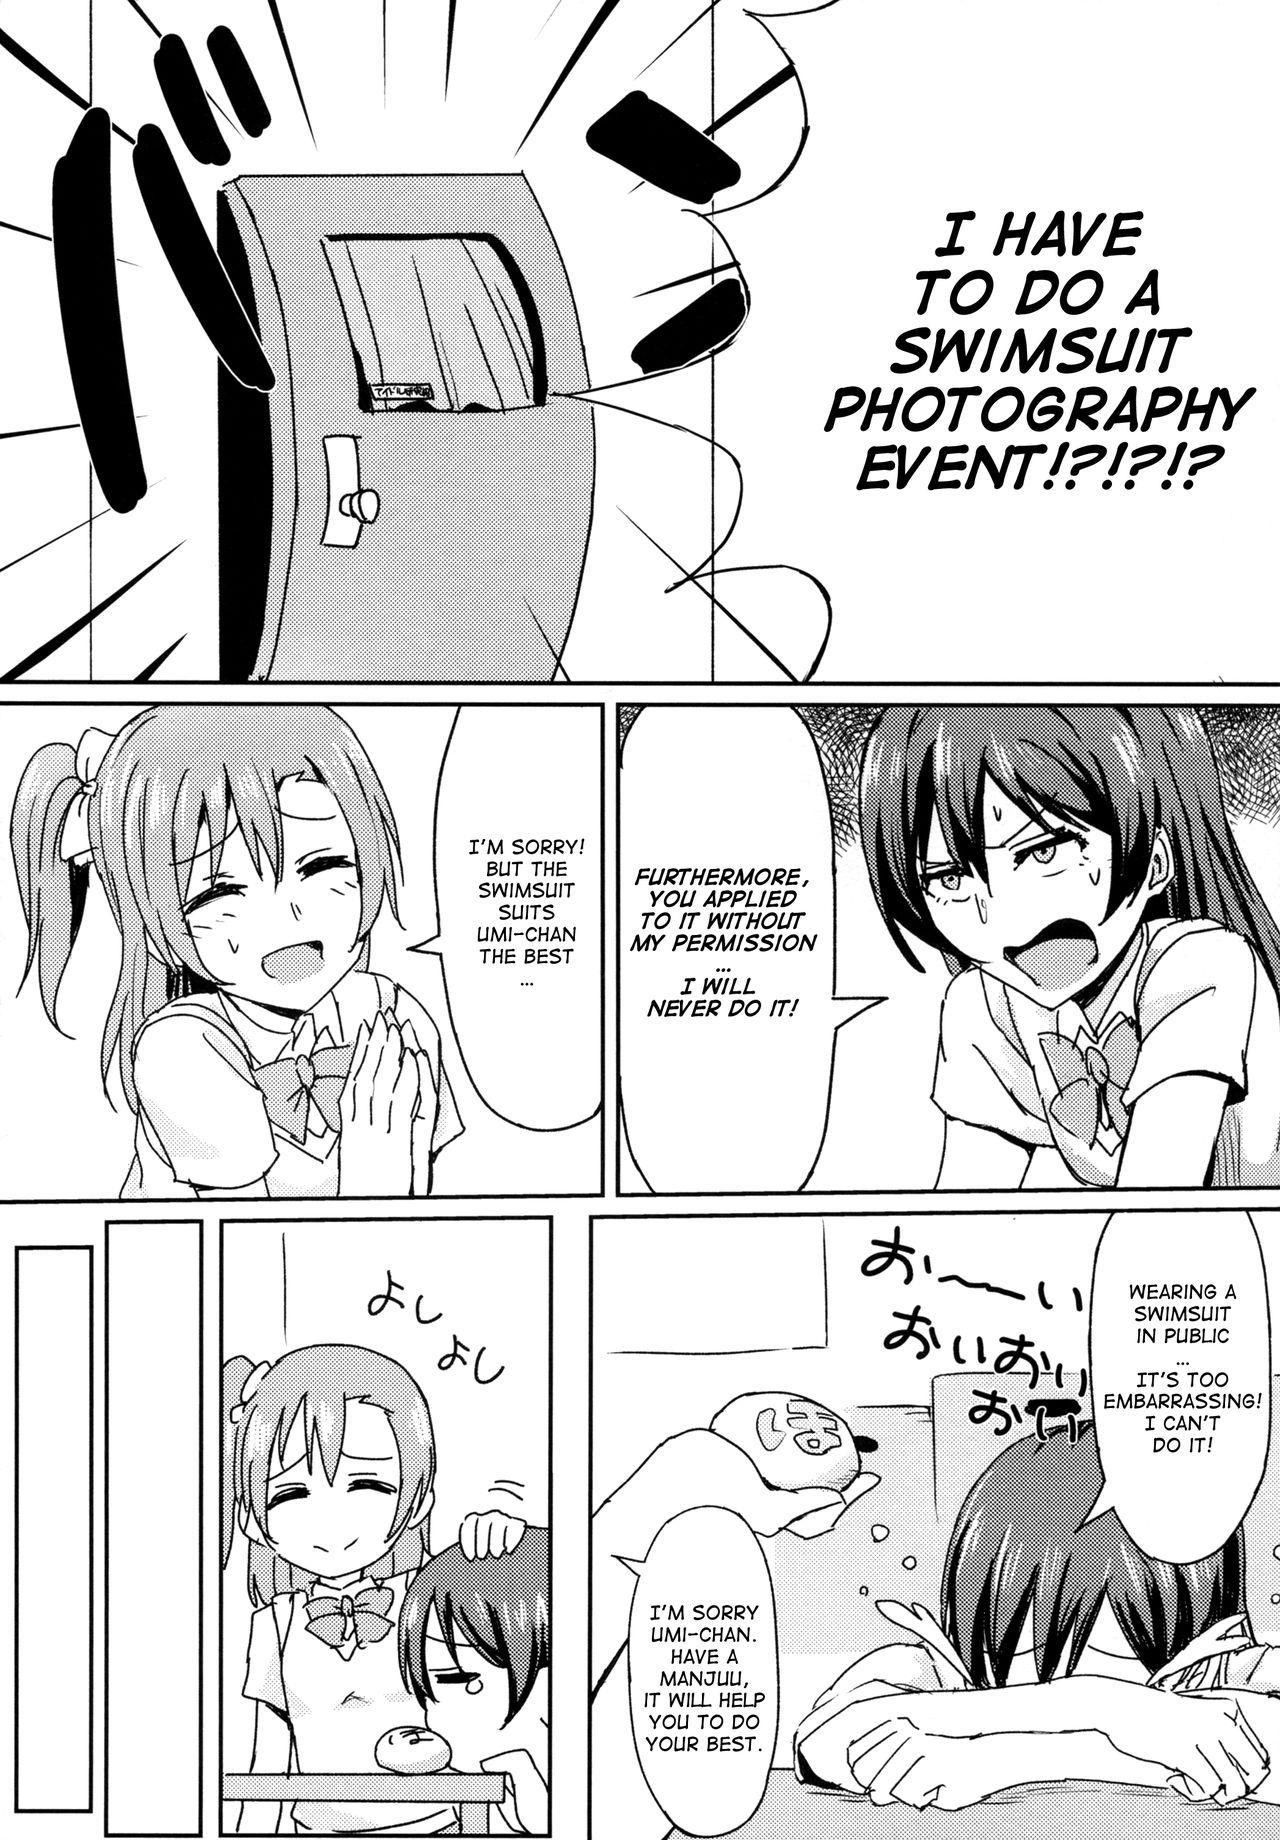 Mature Woman Hah,Wrench This! - Love live Ruiva - Page 5